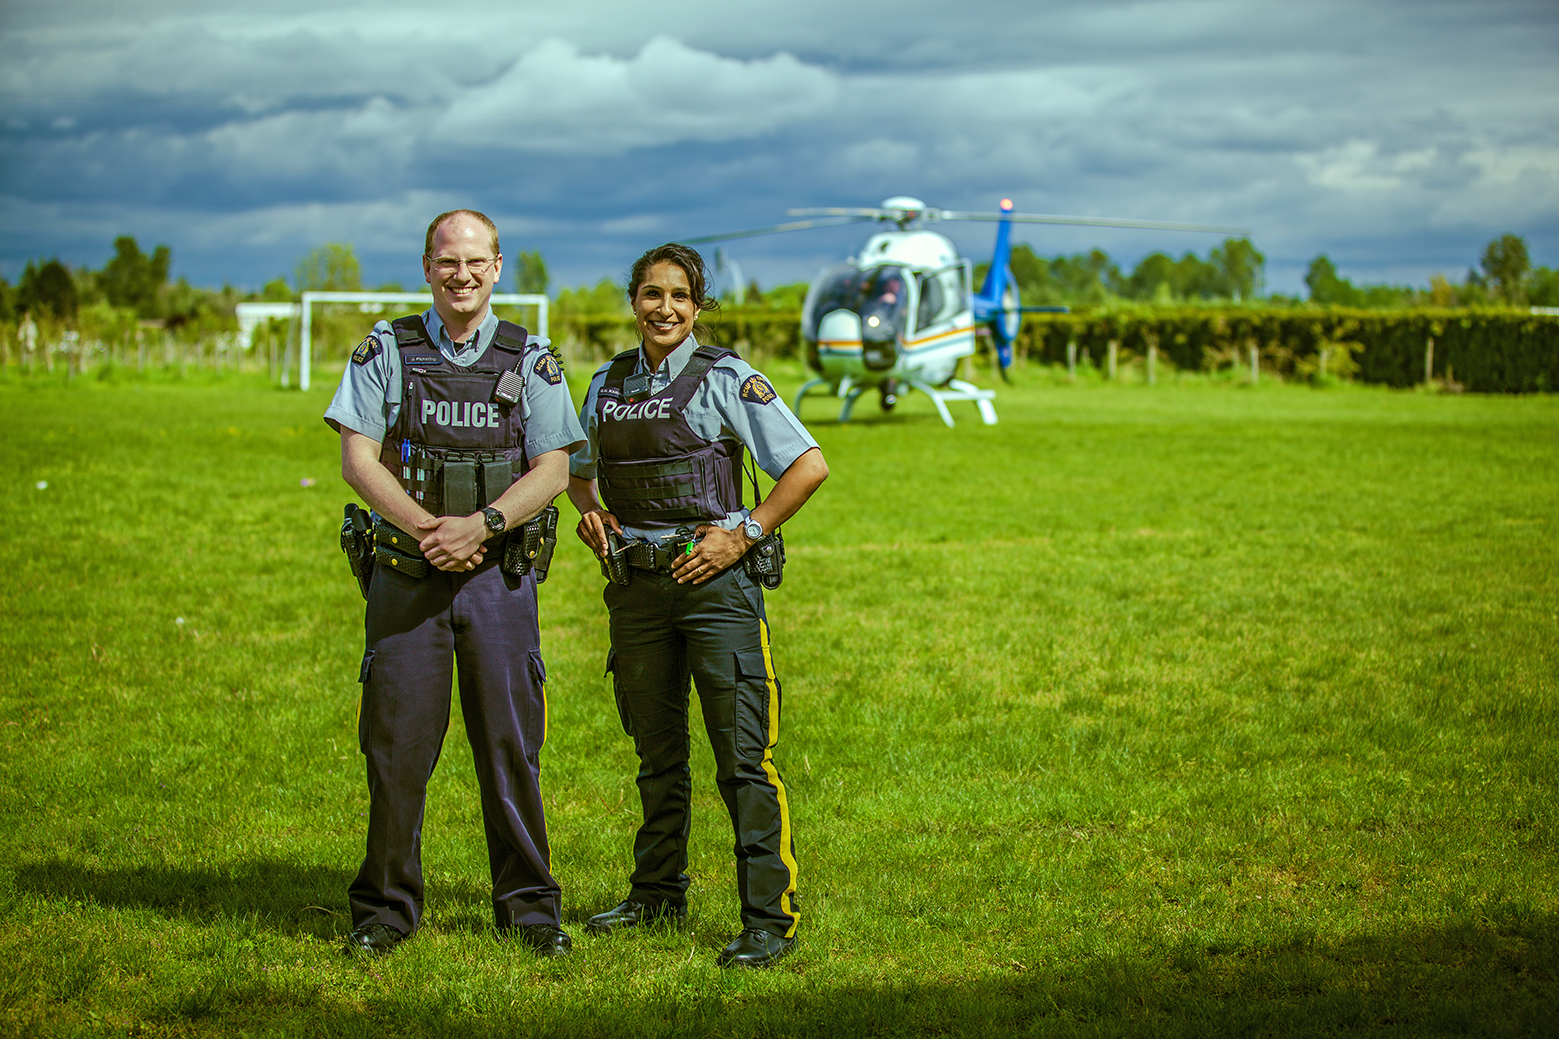 Two Edmonton Police standing in foreground smiling with a helicopter in the background out of focus